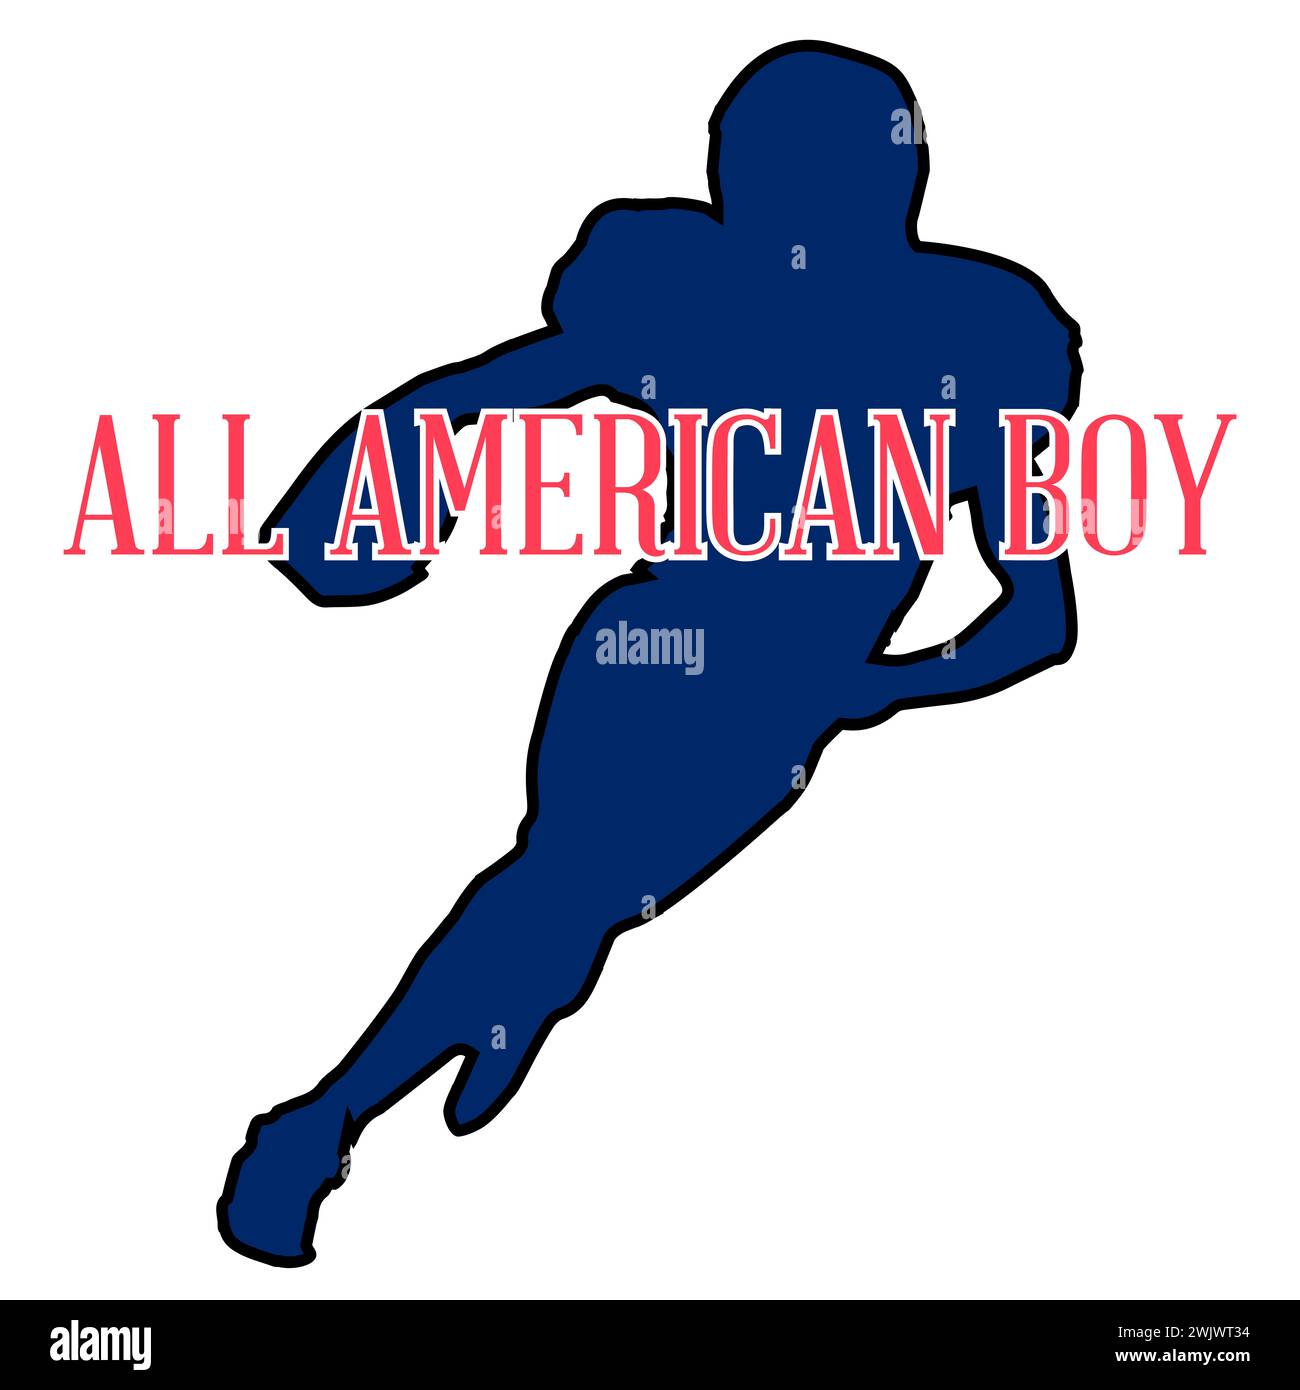 All American Boy football player icon silhouette on a white background Stock Photo